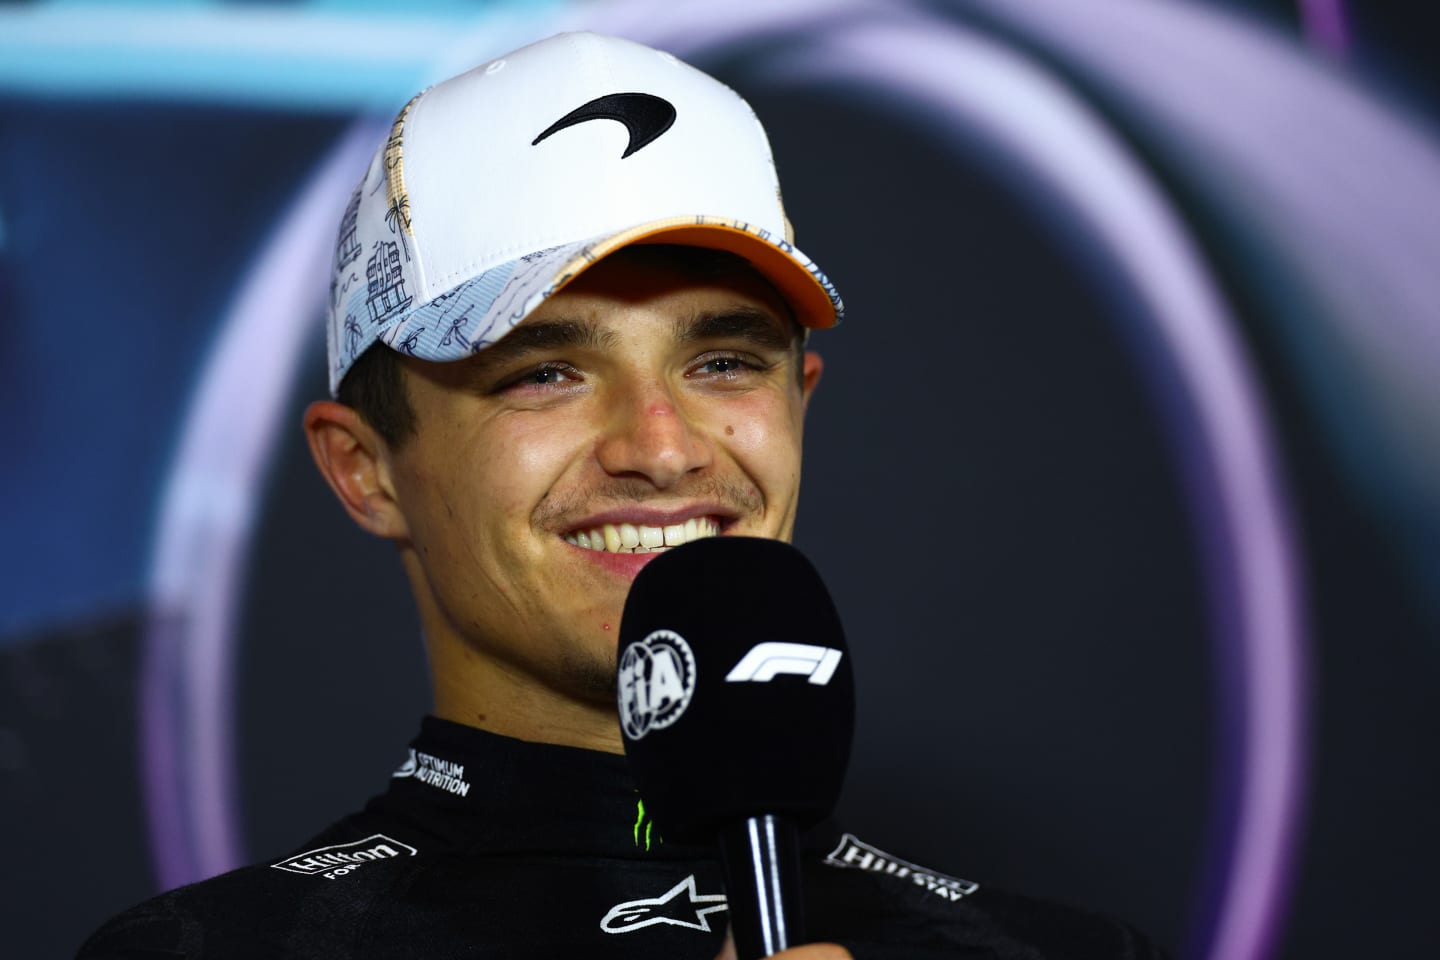 MIAMI, FLORIDA - MAY 05: Race winner Lando Norris of Great Britain and McLaren attends the press conference after the F1 Grand Prix of Miami at Miami International Autodrome on May 05, 2024 in Miami, Florida. (Photo by Clive Rose/Getty Images)